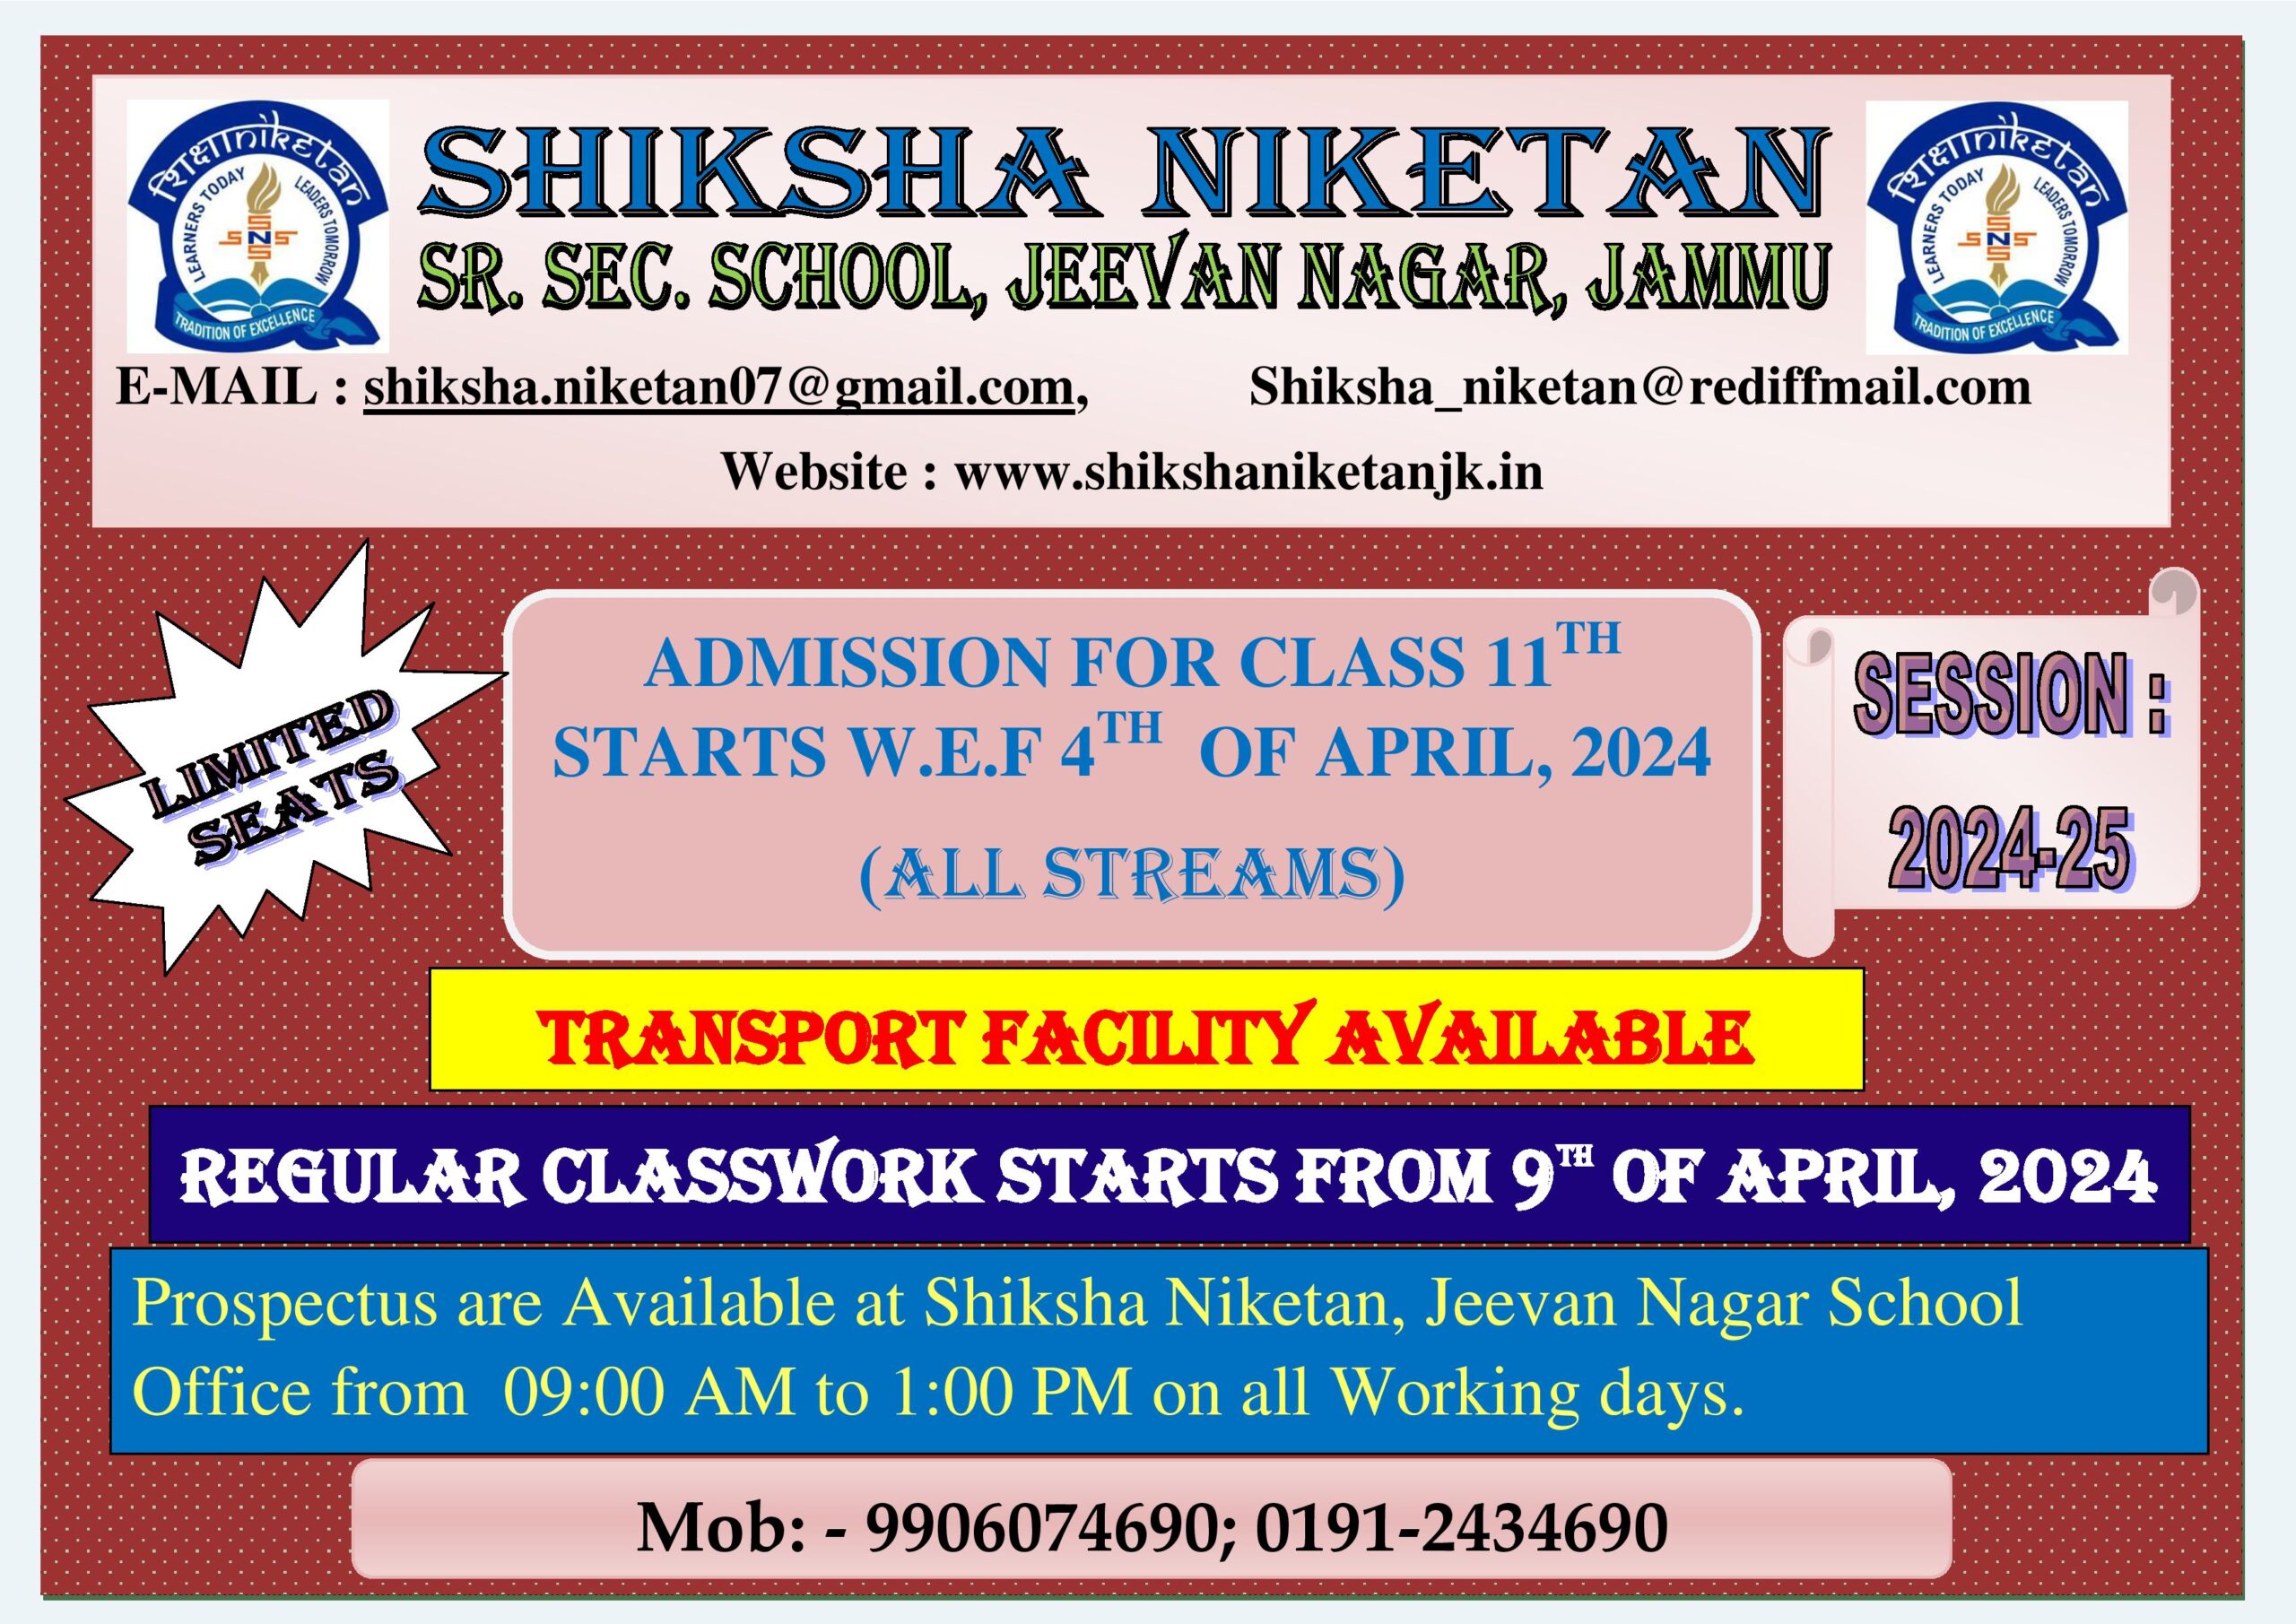 REGISTRATION FOR CLASS 11TH 2024-25 (2)